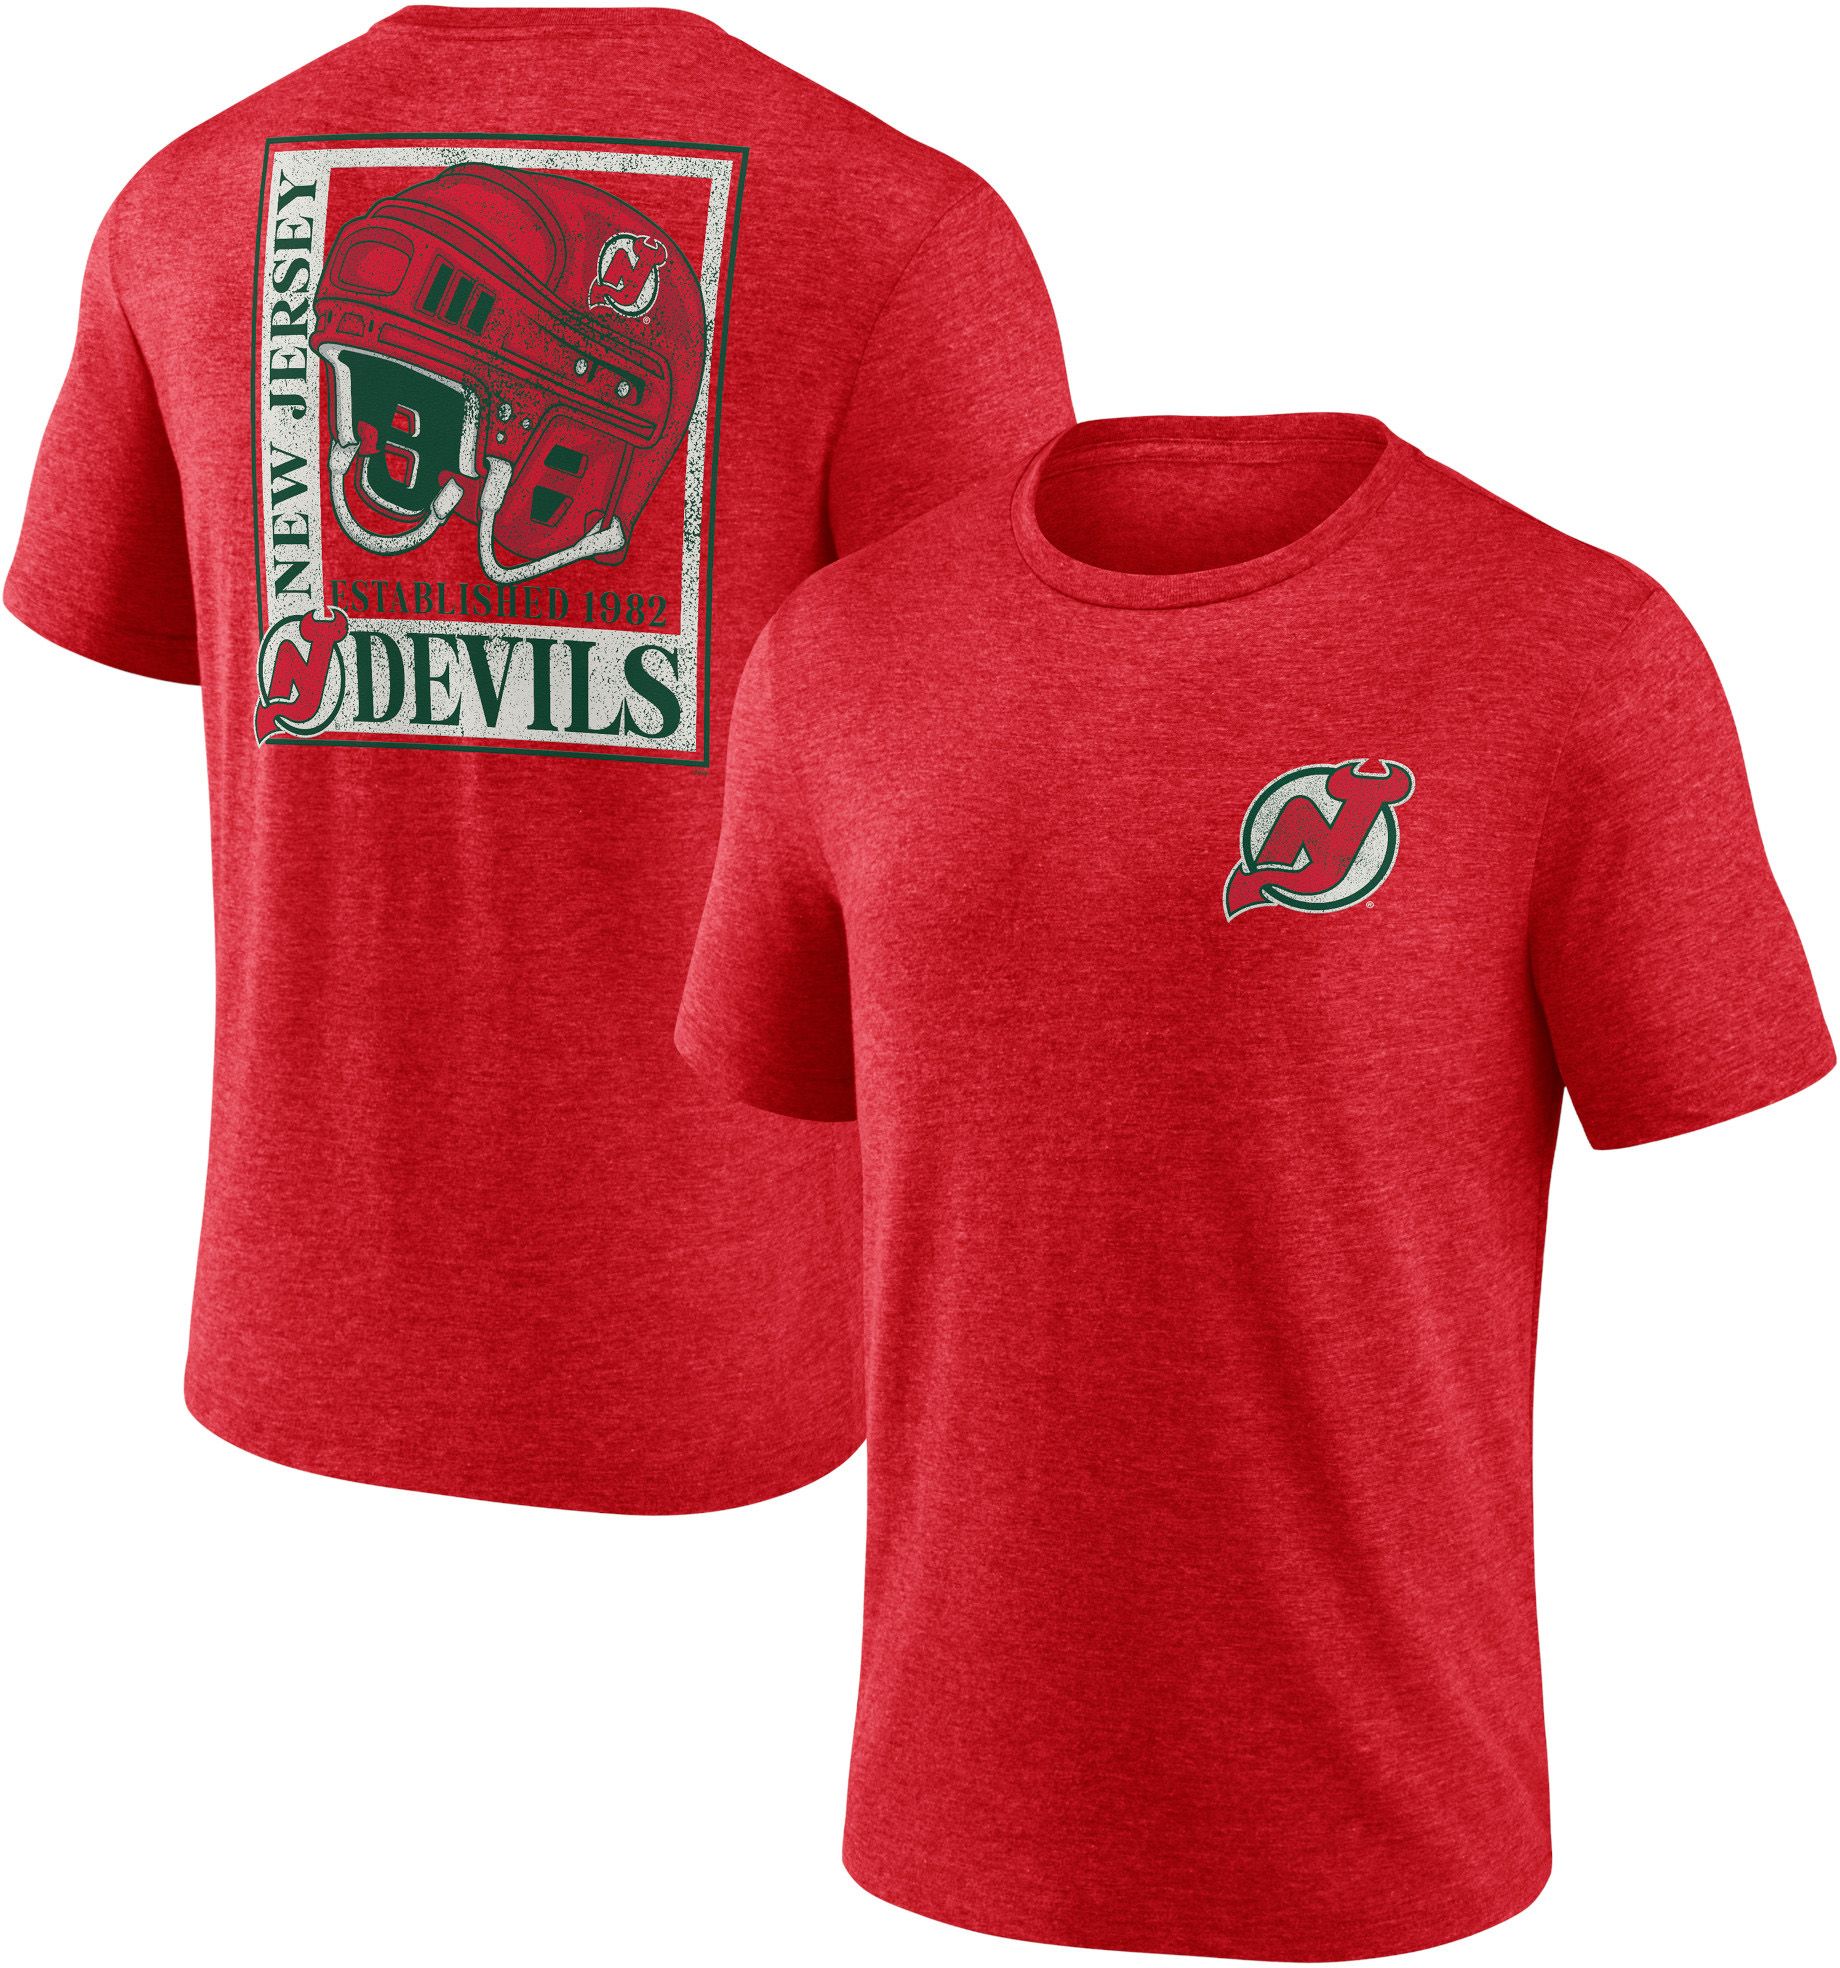 New Jersey Devils throwback apparel